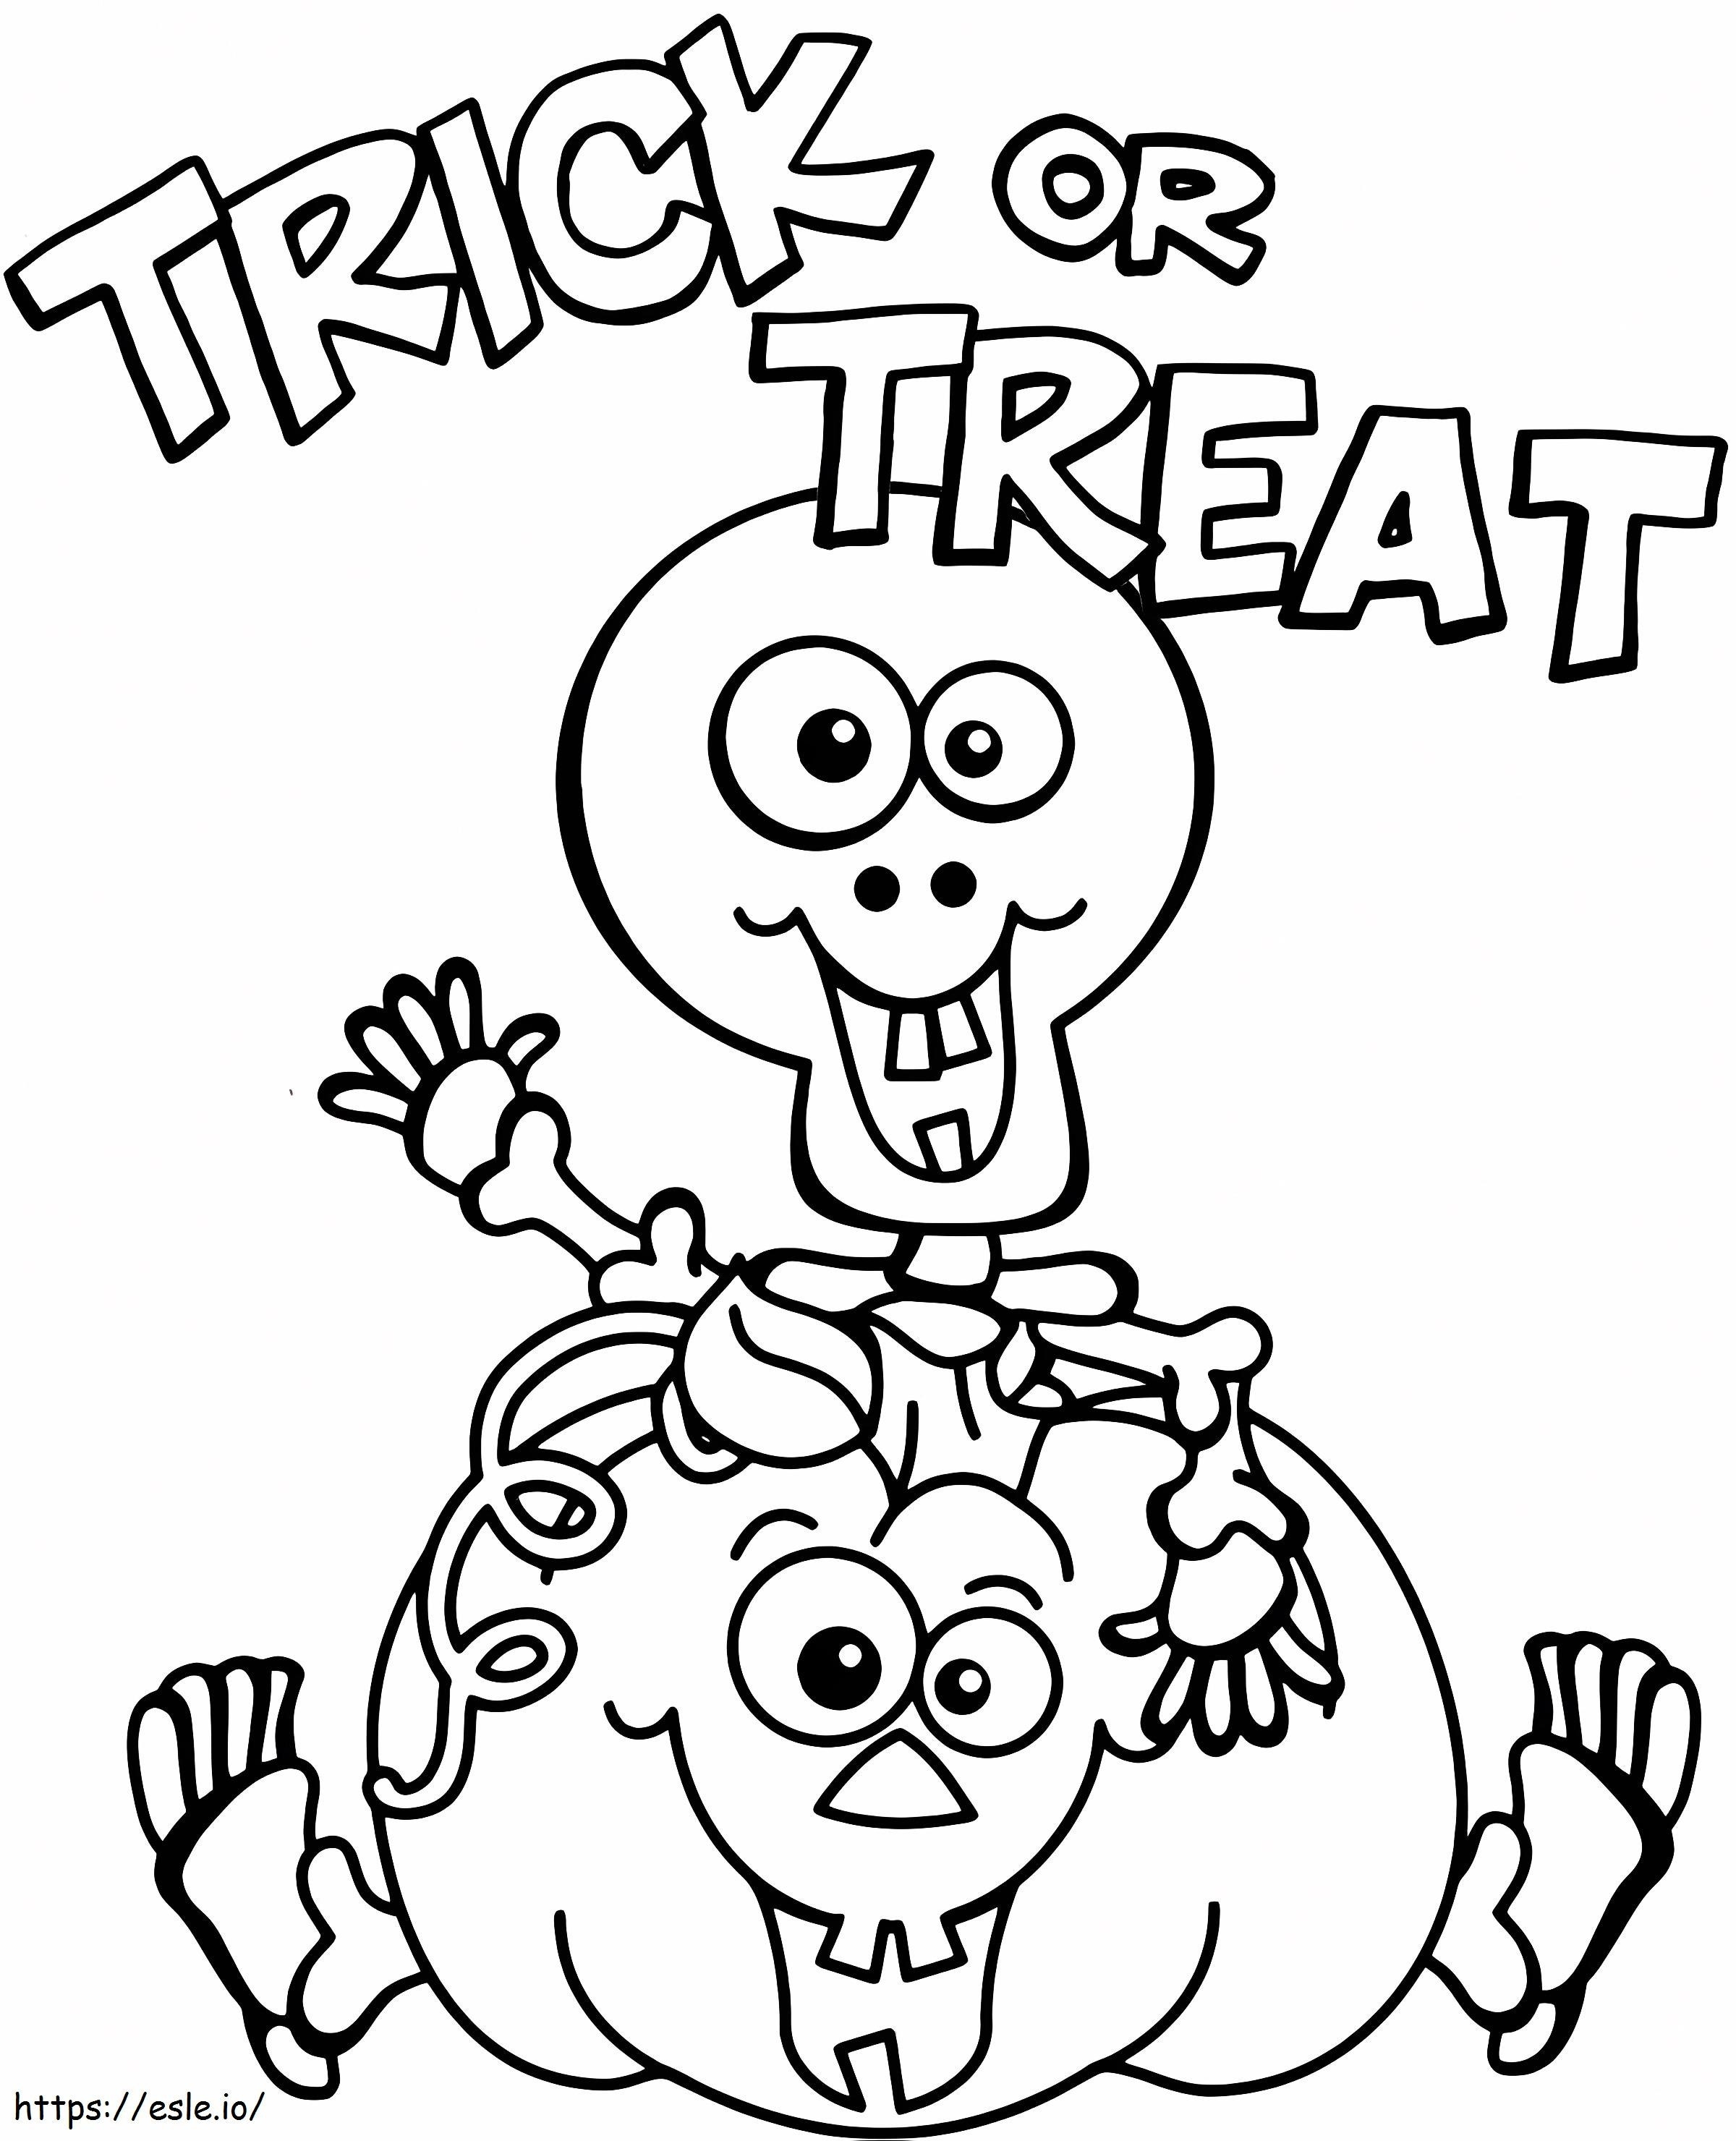 Funny Trick Or Treat 1 coloring page